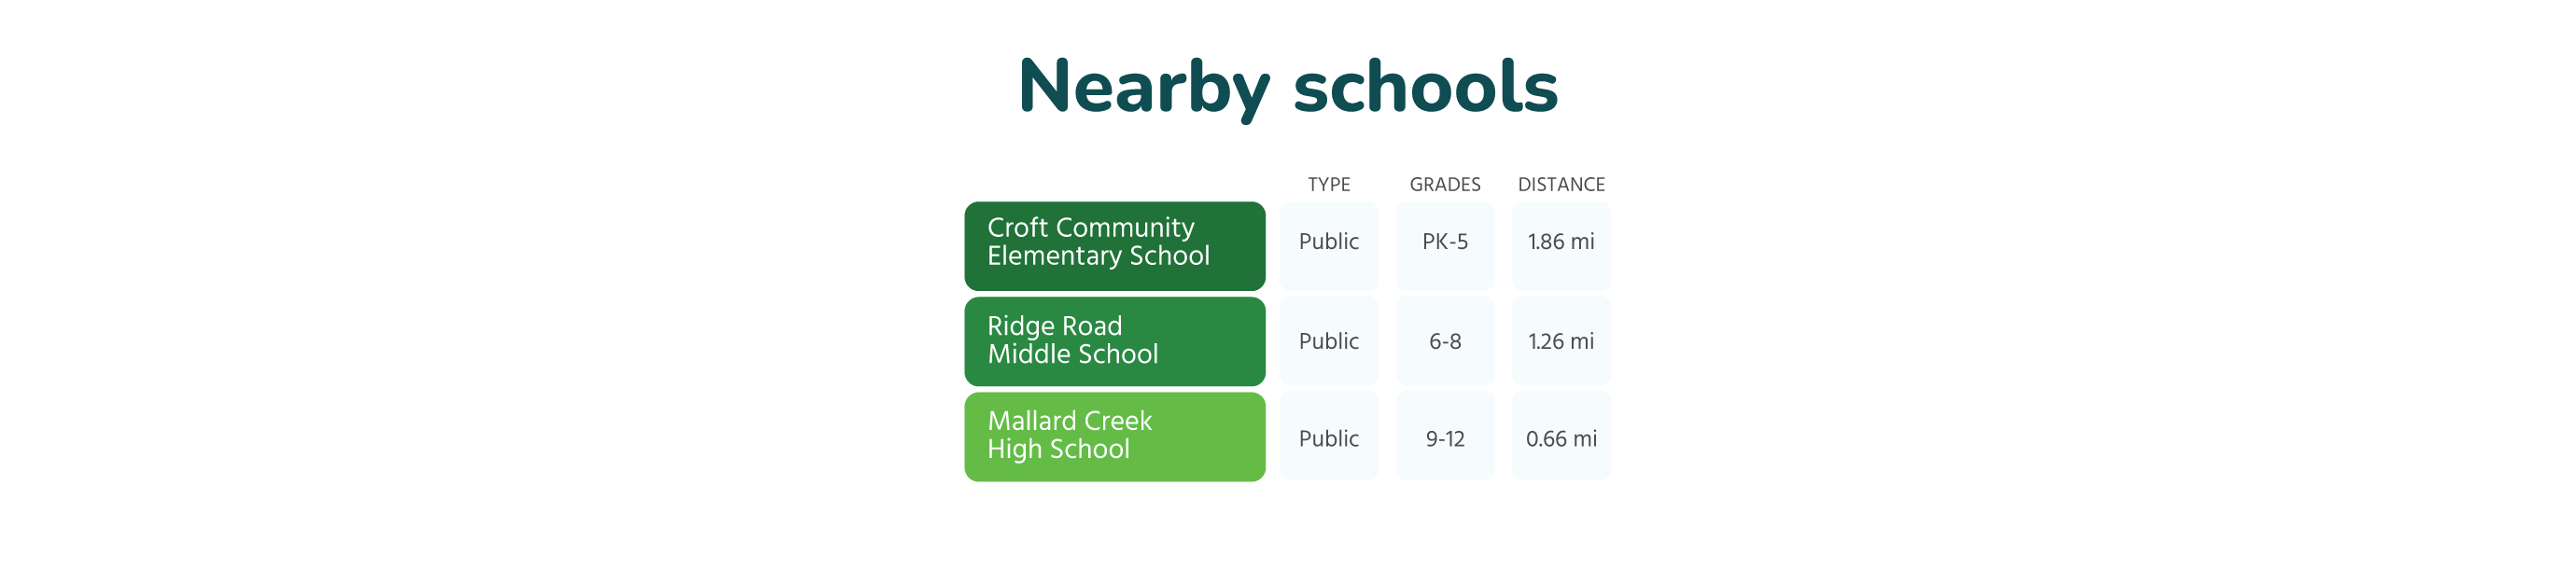 Smith Farms rental community nearby schools graphic.